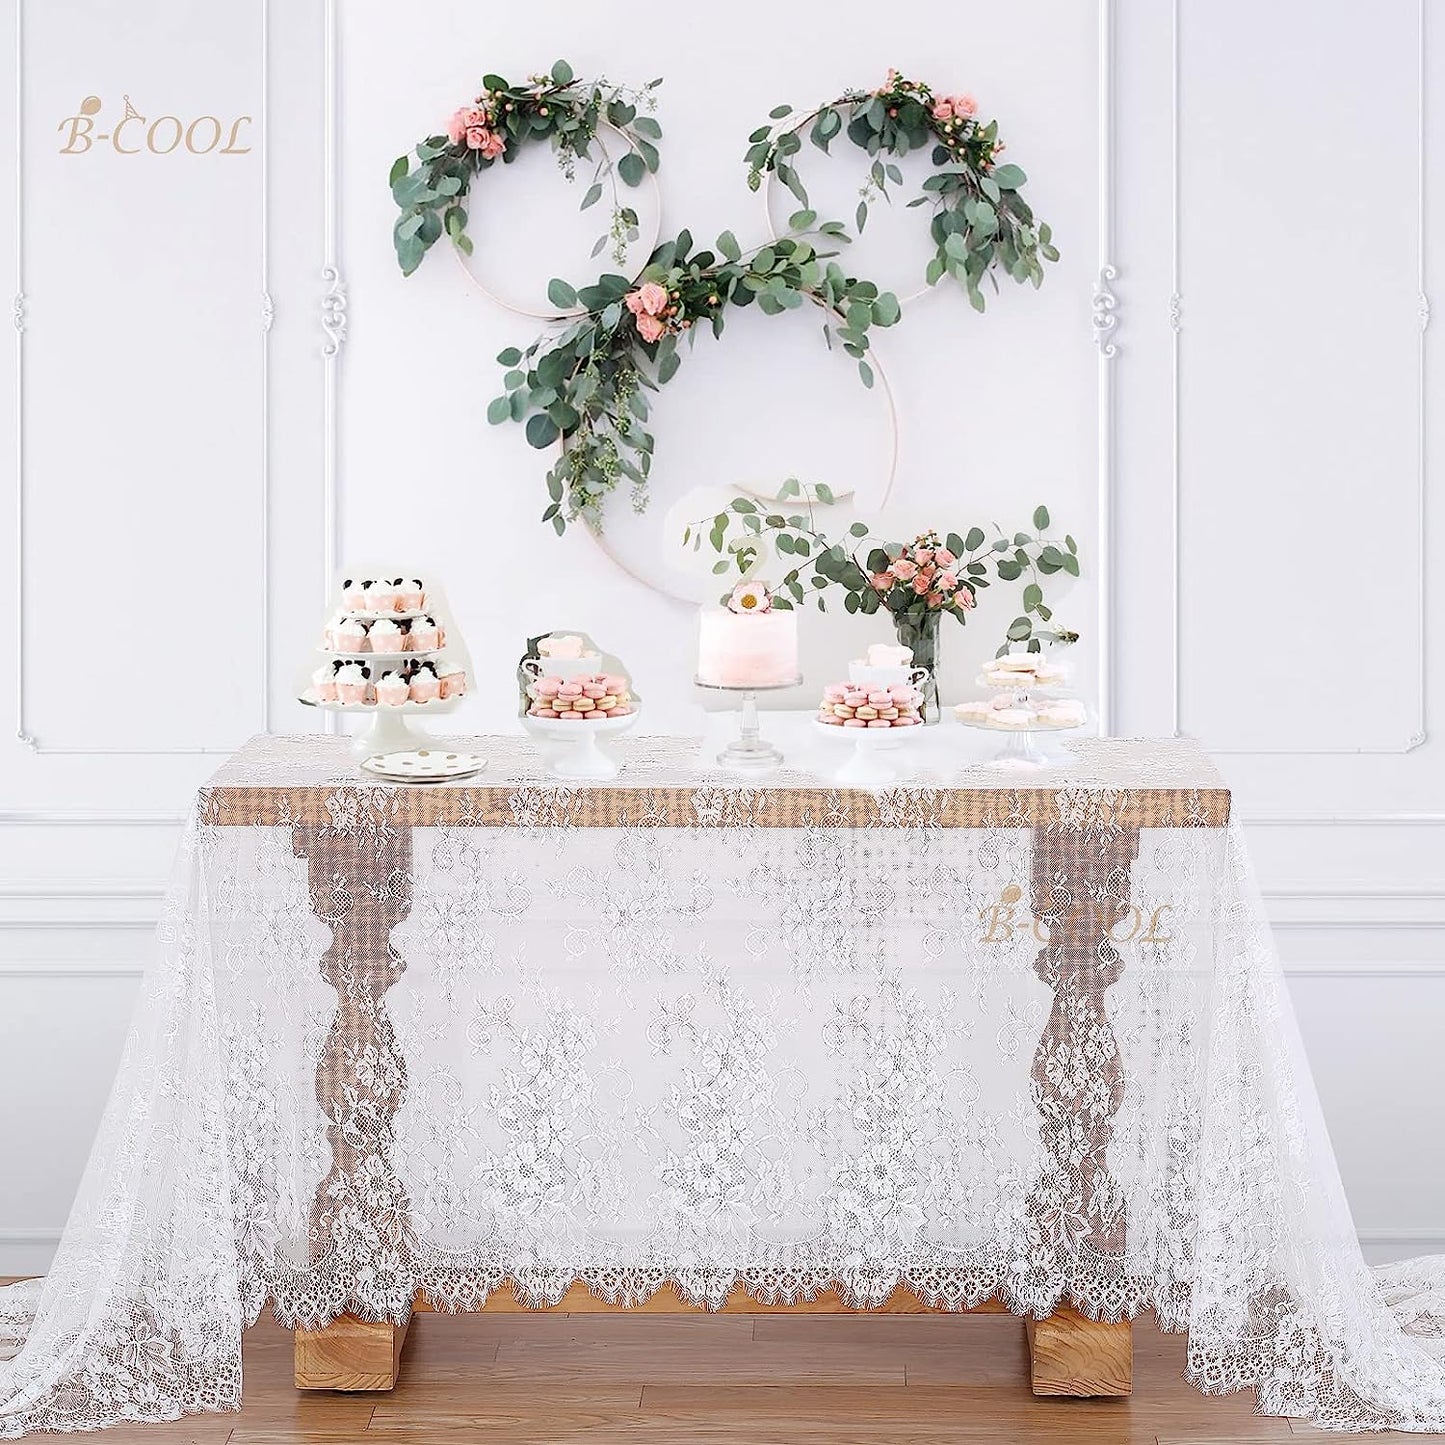 Lace Tablecloth 10ft